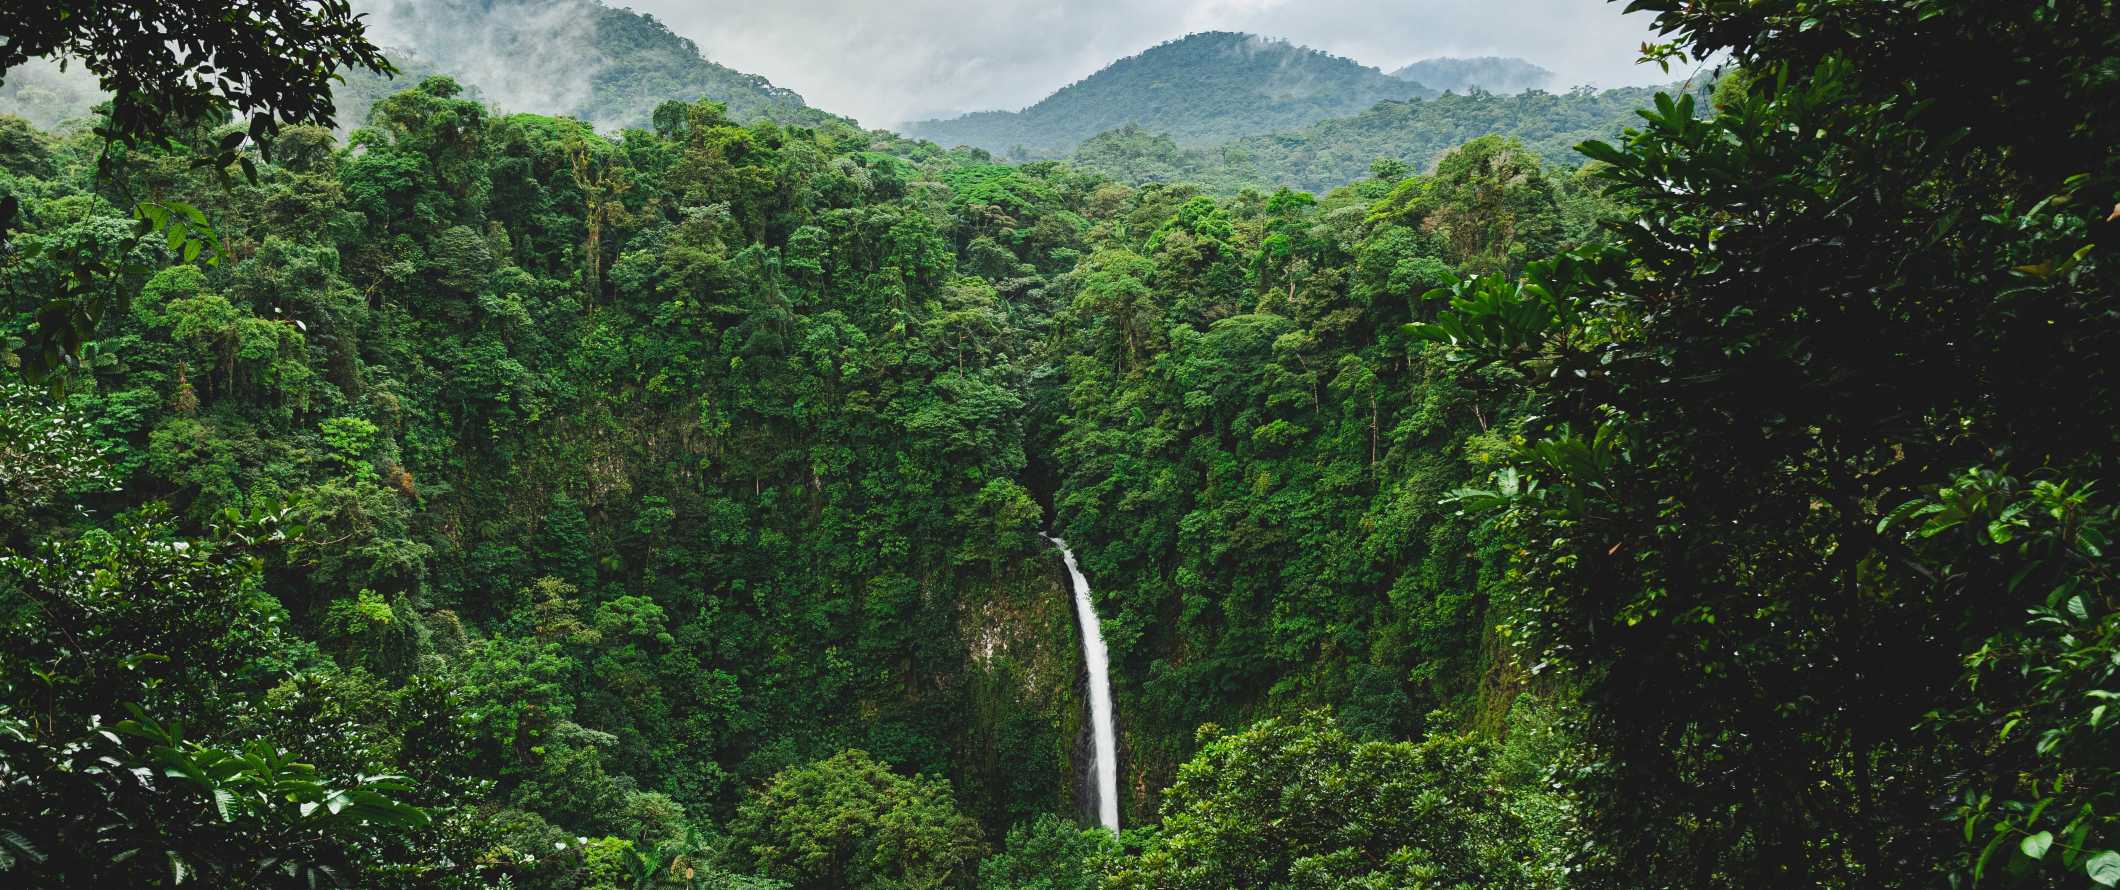 The famous La Fortuna waterfall cascading through the bright green forests near Arenal in Costa Rica